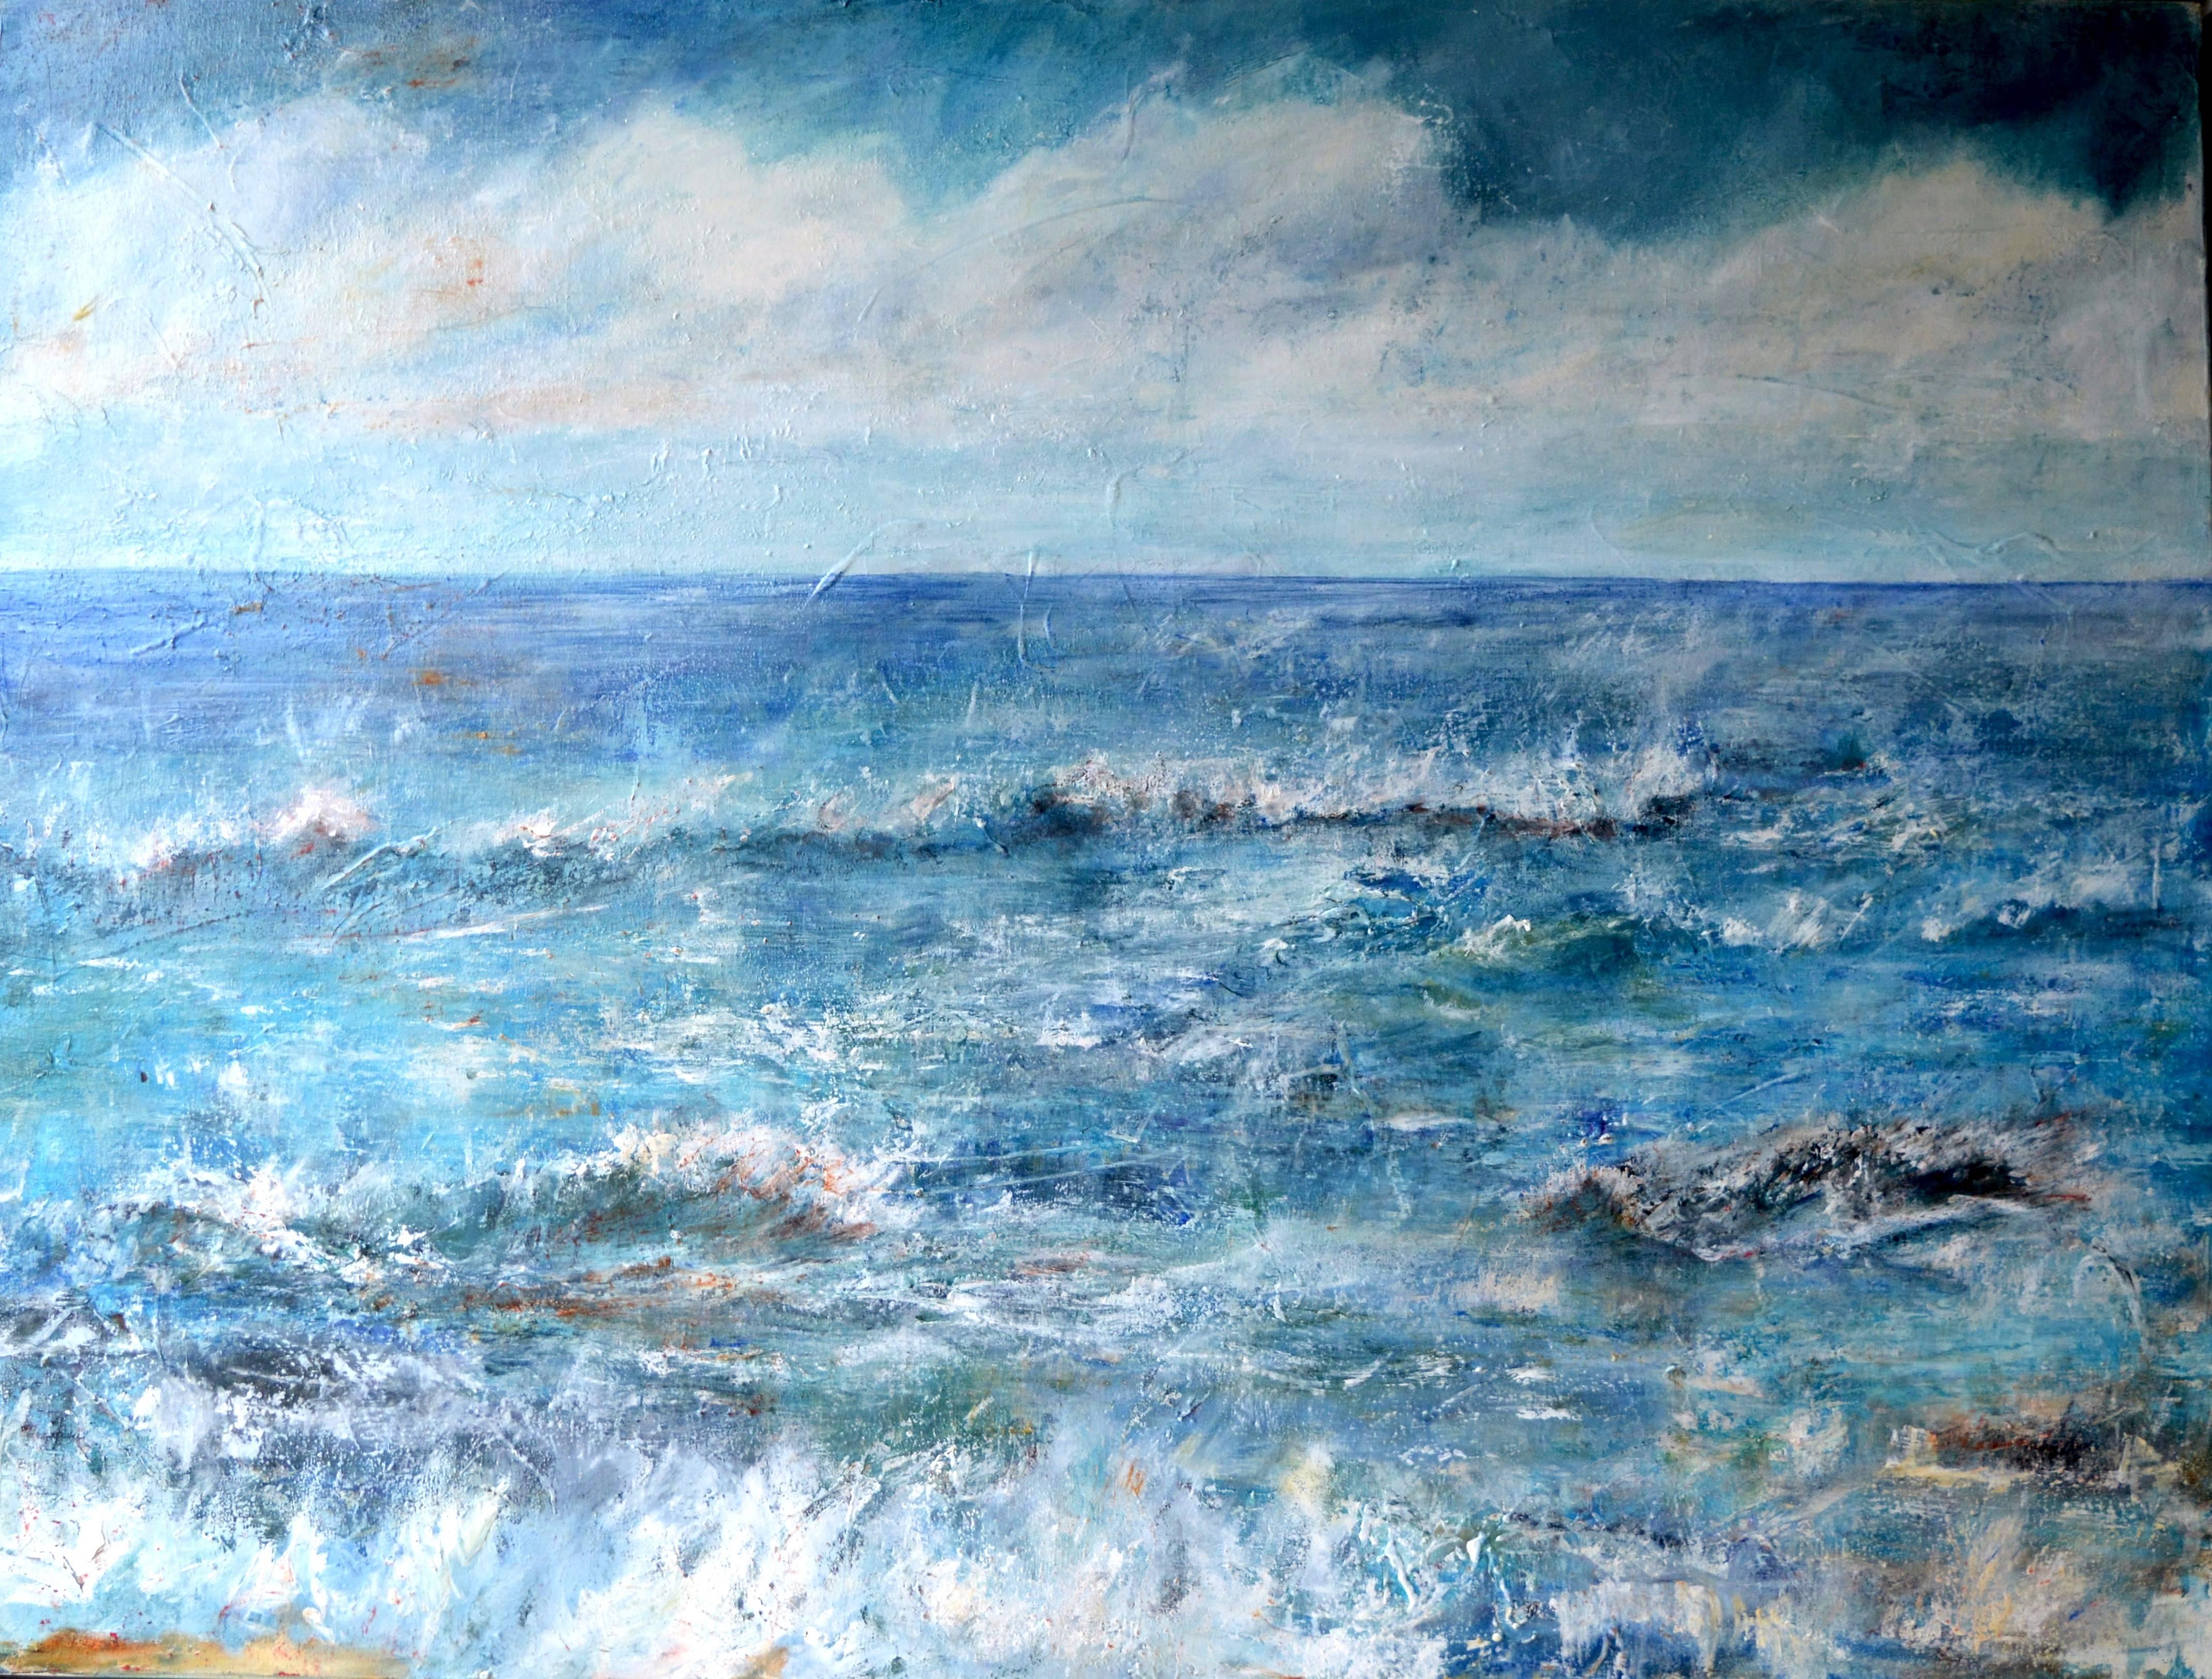 Penny Rumble Landscape Painting - Listen To The Sound Of The Sea, Contemporary Seascape Oil Painting